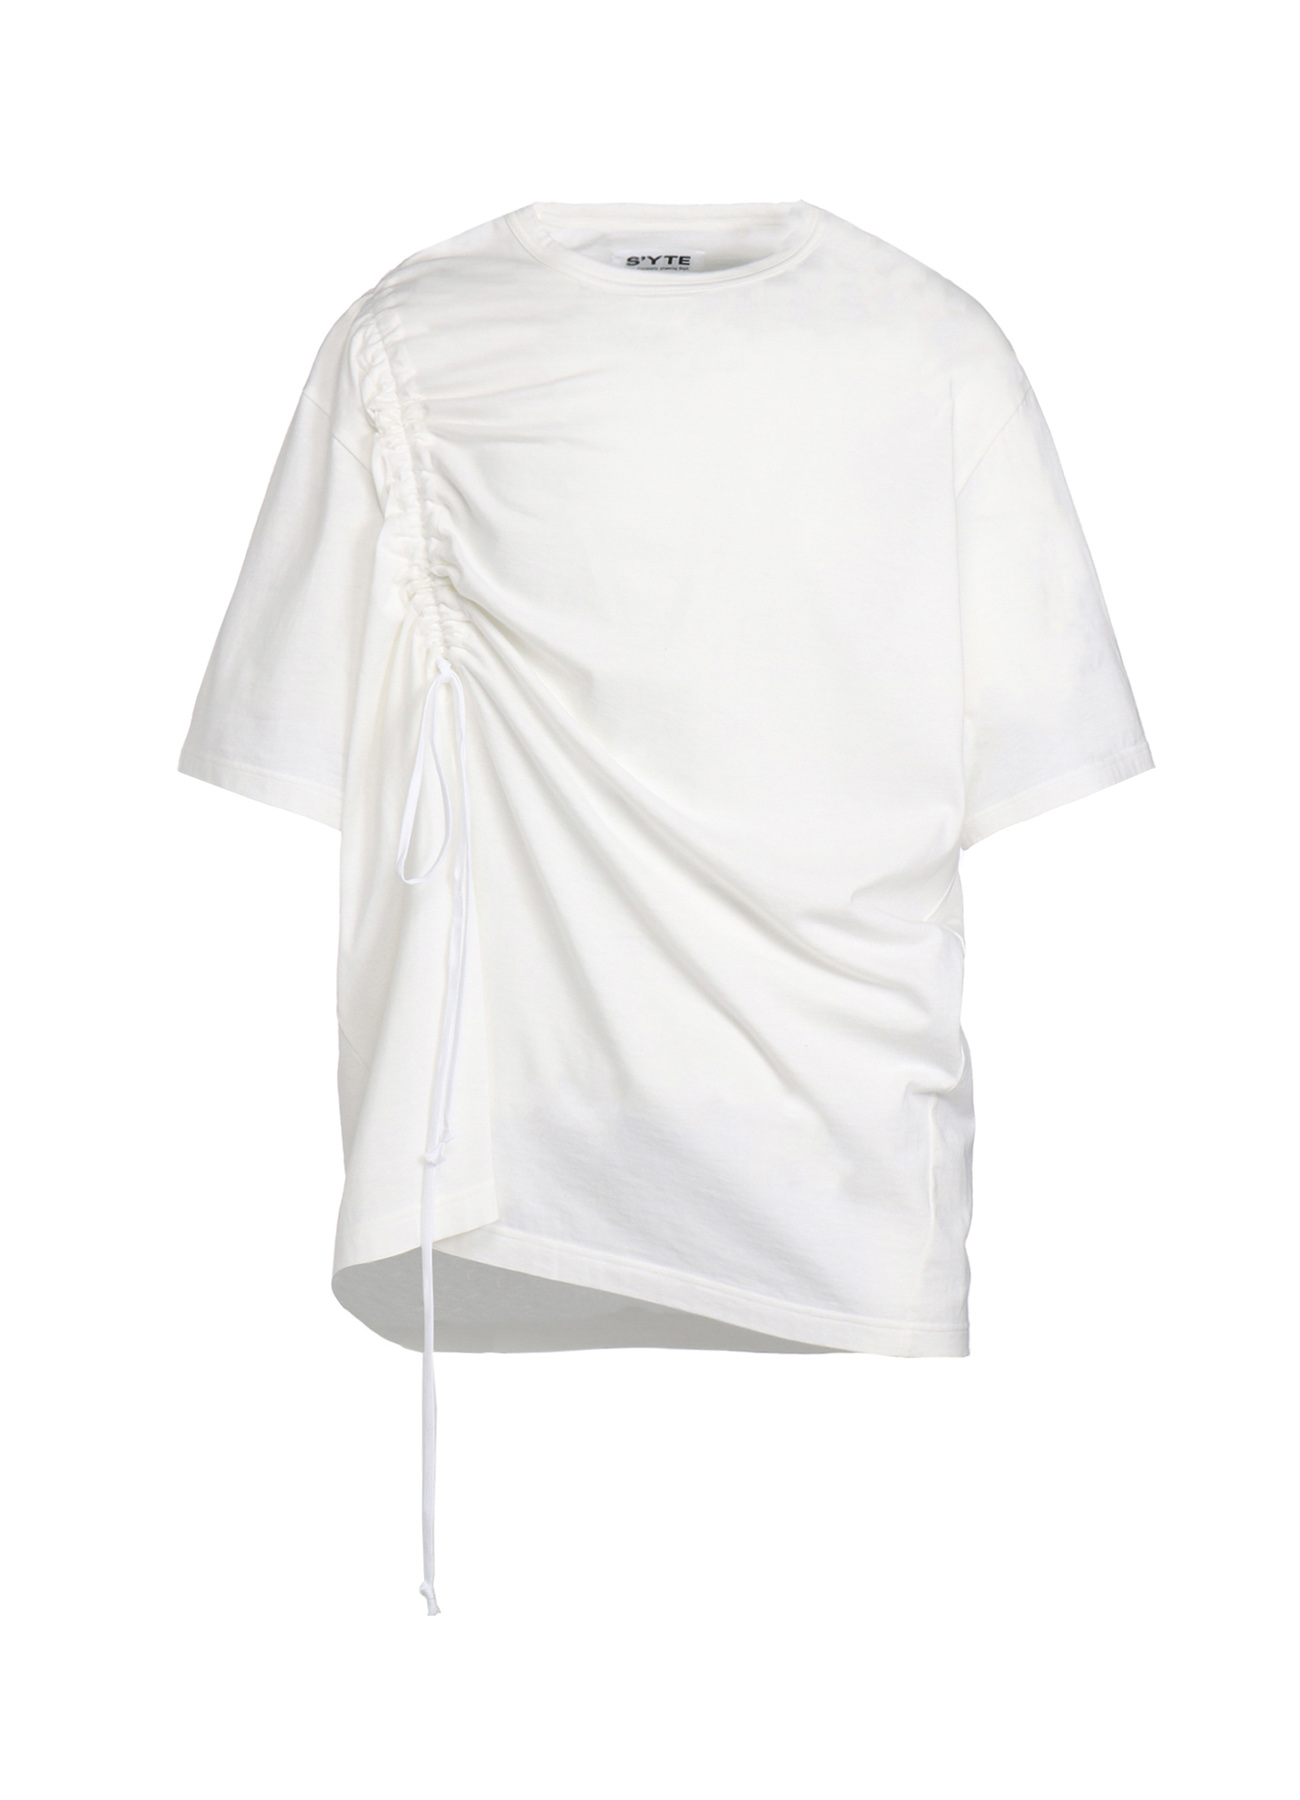 COTTON JERSEY T-SHIRT WITH GATHERED STRINGS